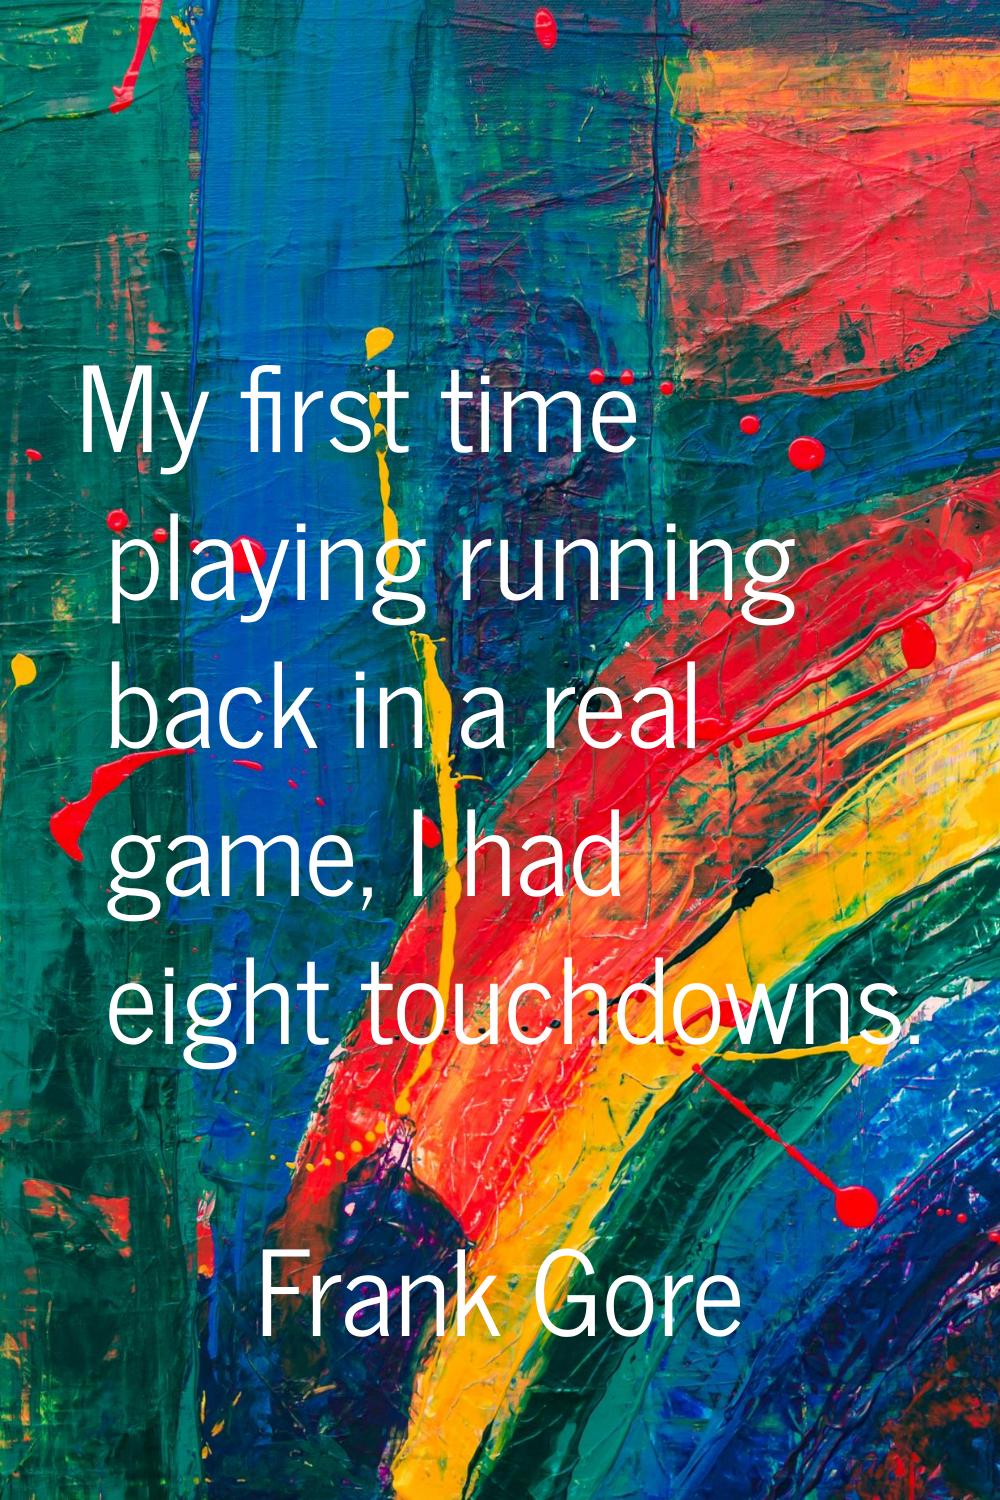 My first time playing running back in a real game, I had eight touchdowns.